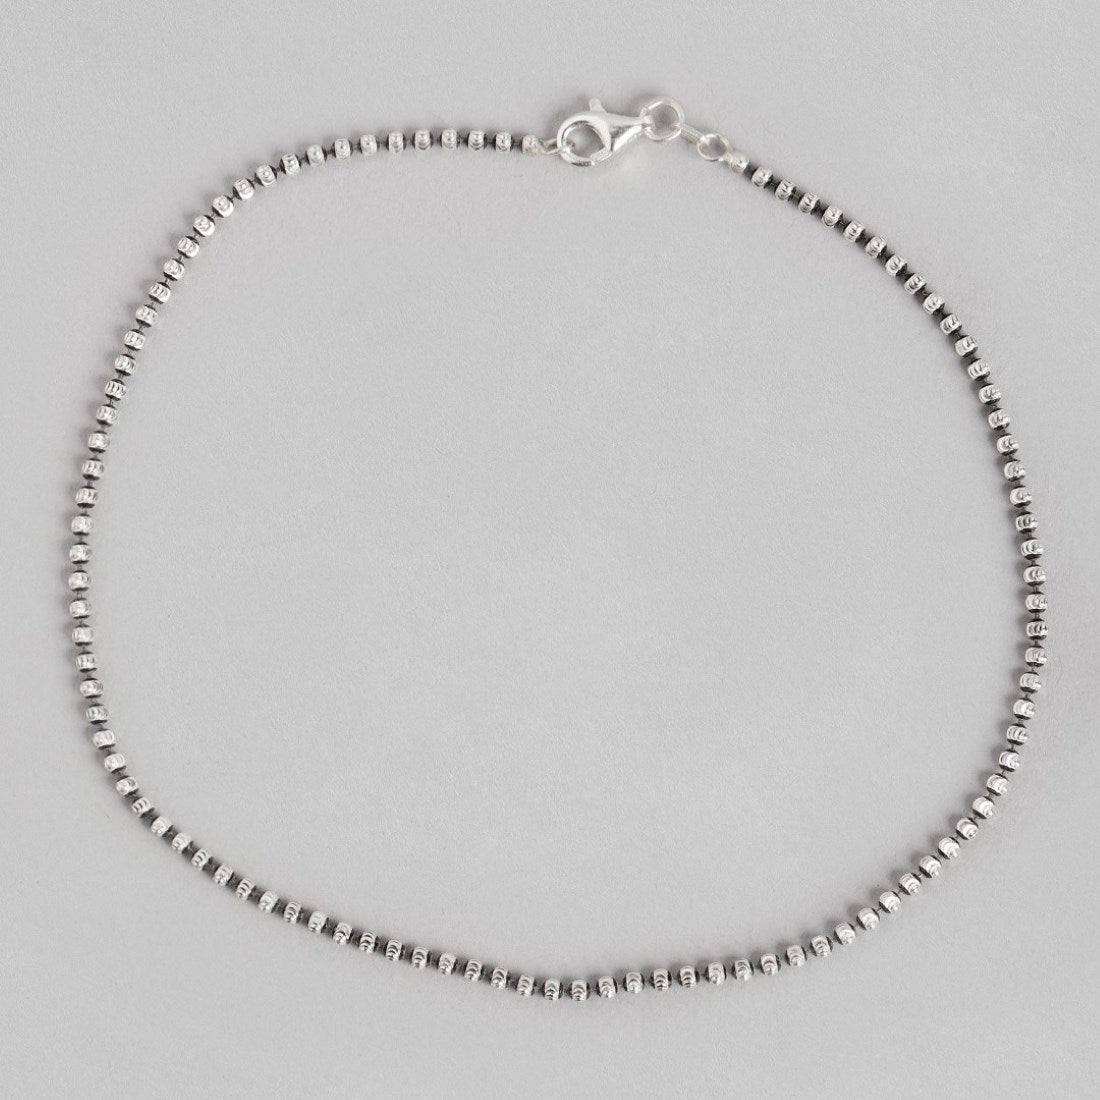 Radiant Rhythm Rhodium-Plated 925 Sterling Silver Beads Chain Anklet